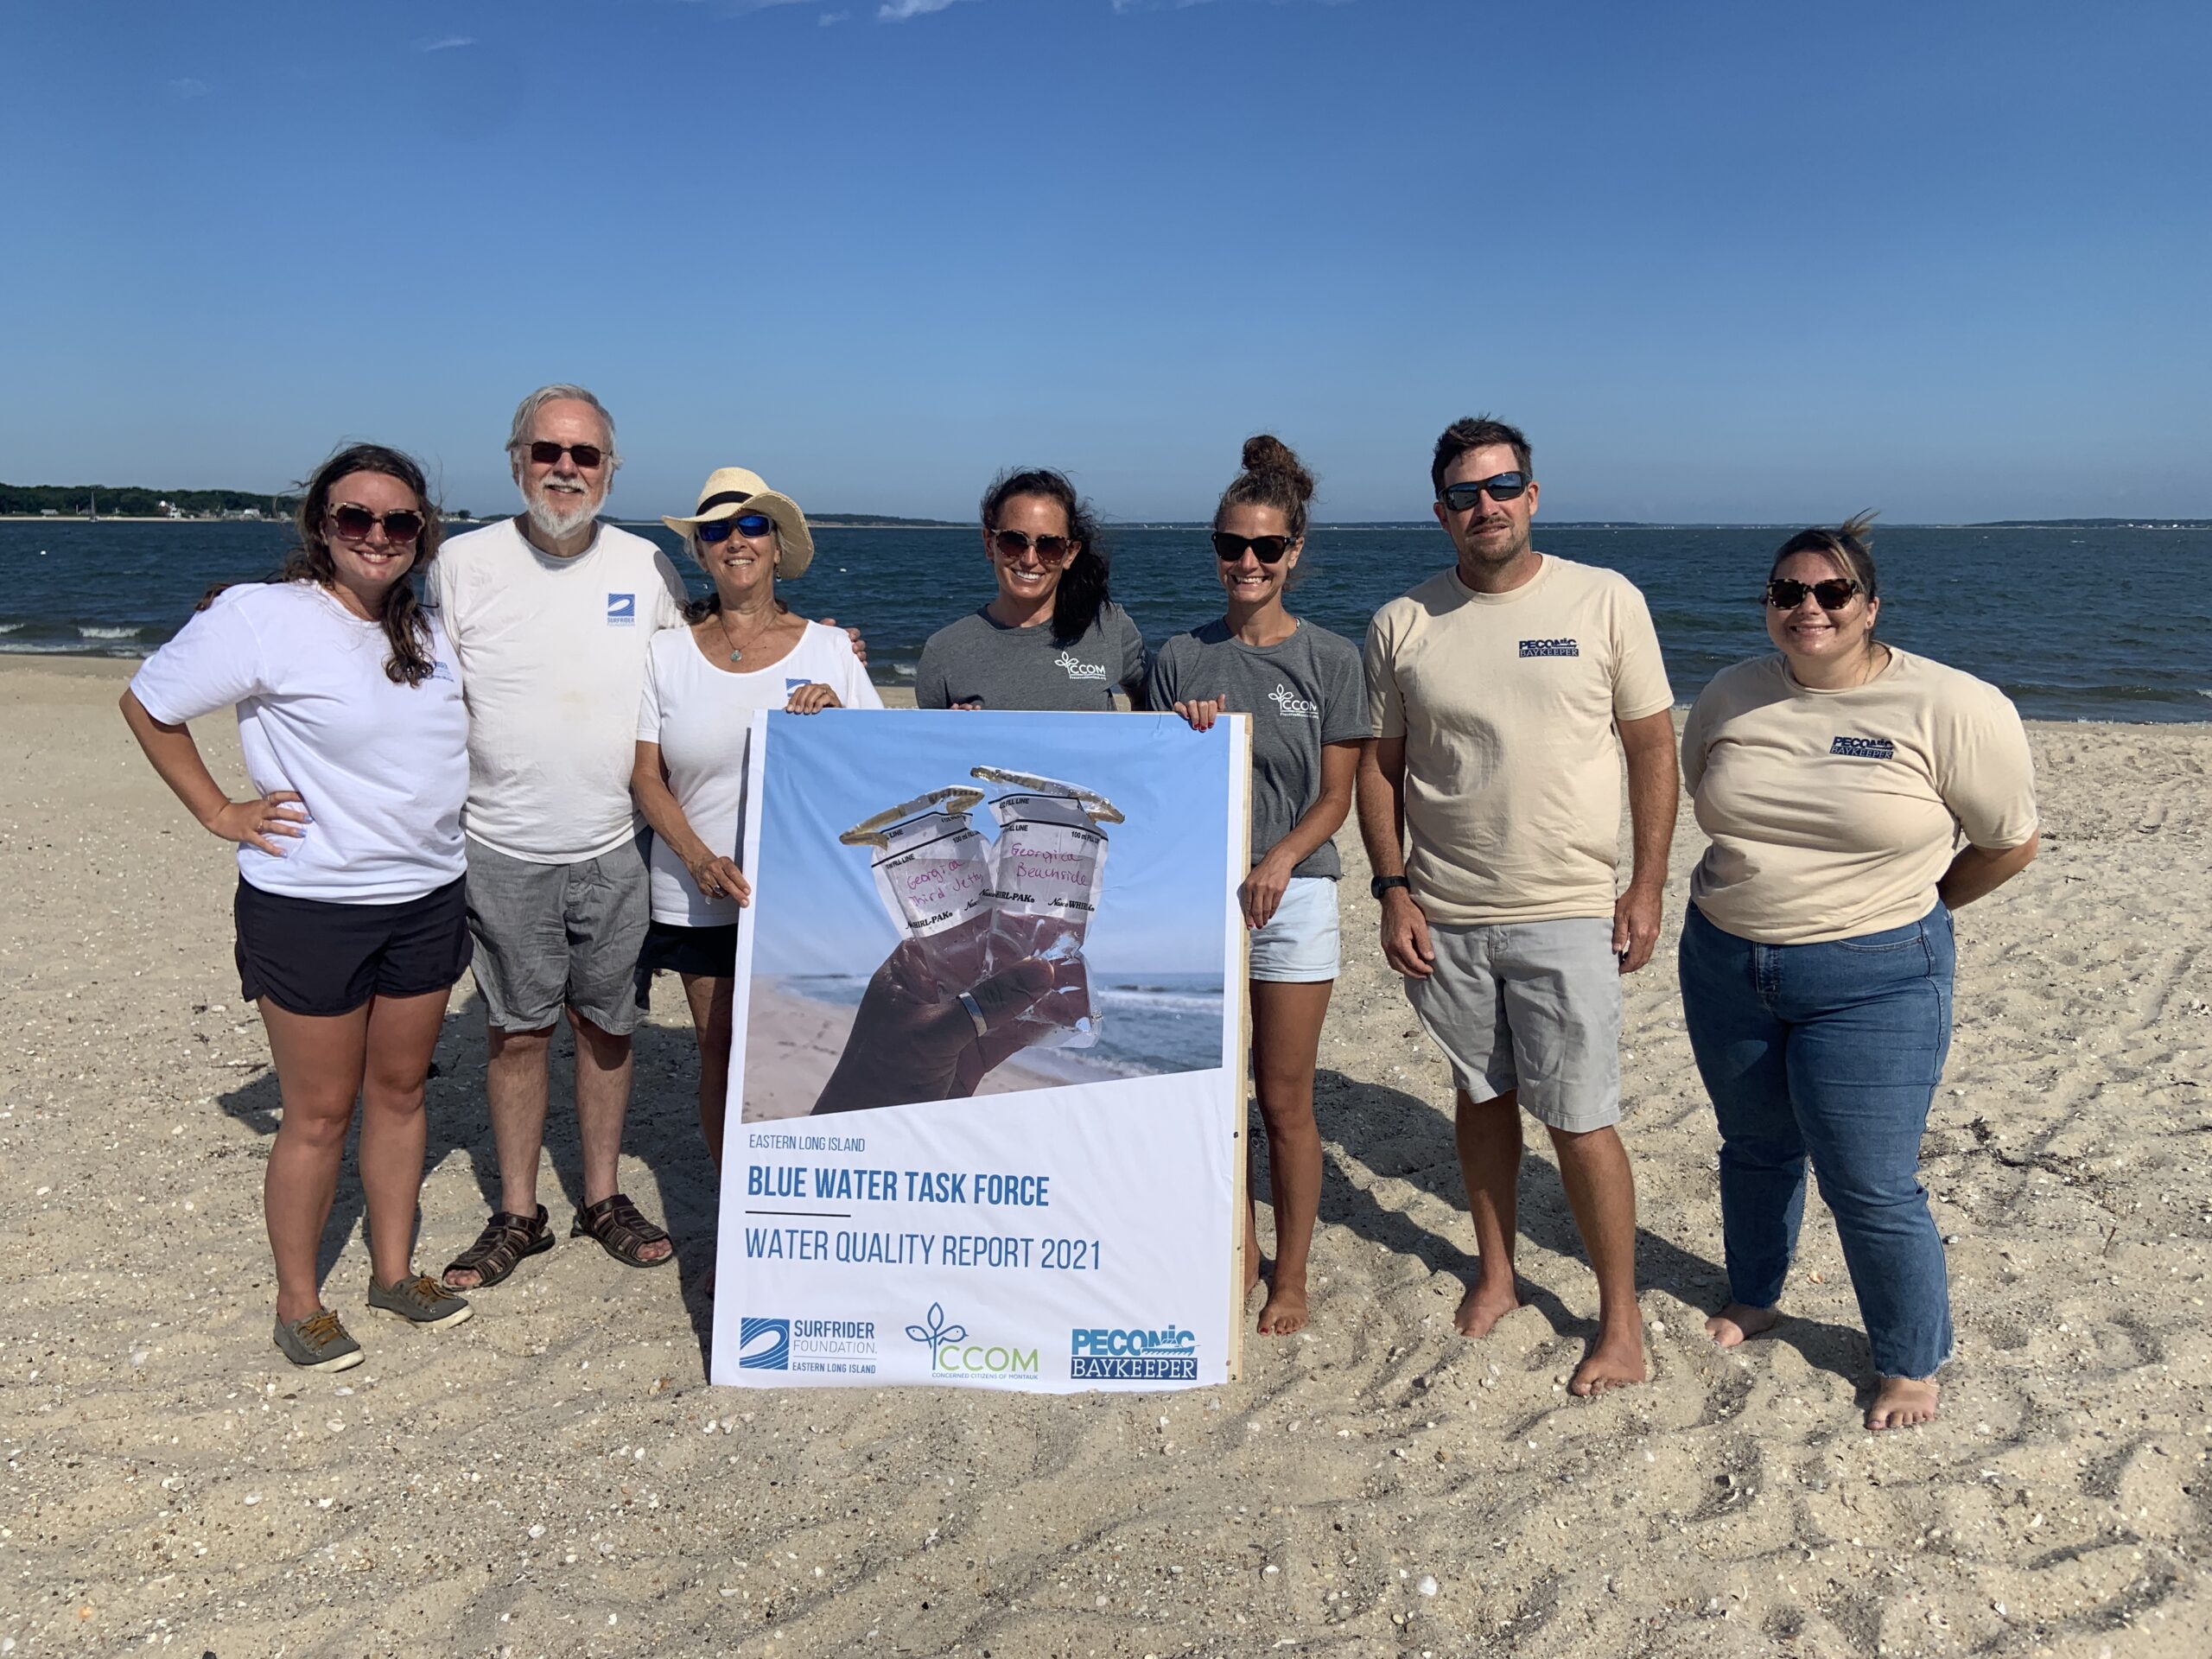 Jenna Schwerzmann of Surfrider, volunteers Tom and Heidi Oleszczuk, Jaime LeDuc and Laura Tooman of Concerned Citizens of Montauk, and Peter Topping and Alexa Annunziata of the Peconic Baykeeper, gather at Long Beach in Noyac Tuesday morning to announce the release of their water quality report for 2021.  STEPHEN J. KOTZ